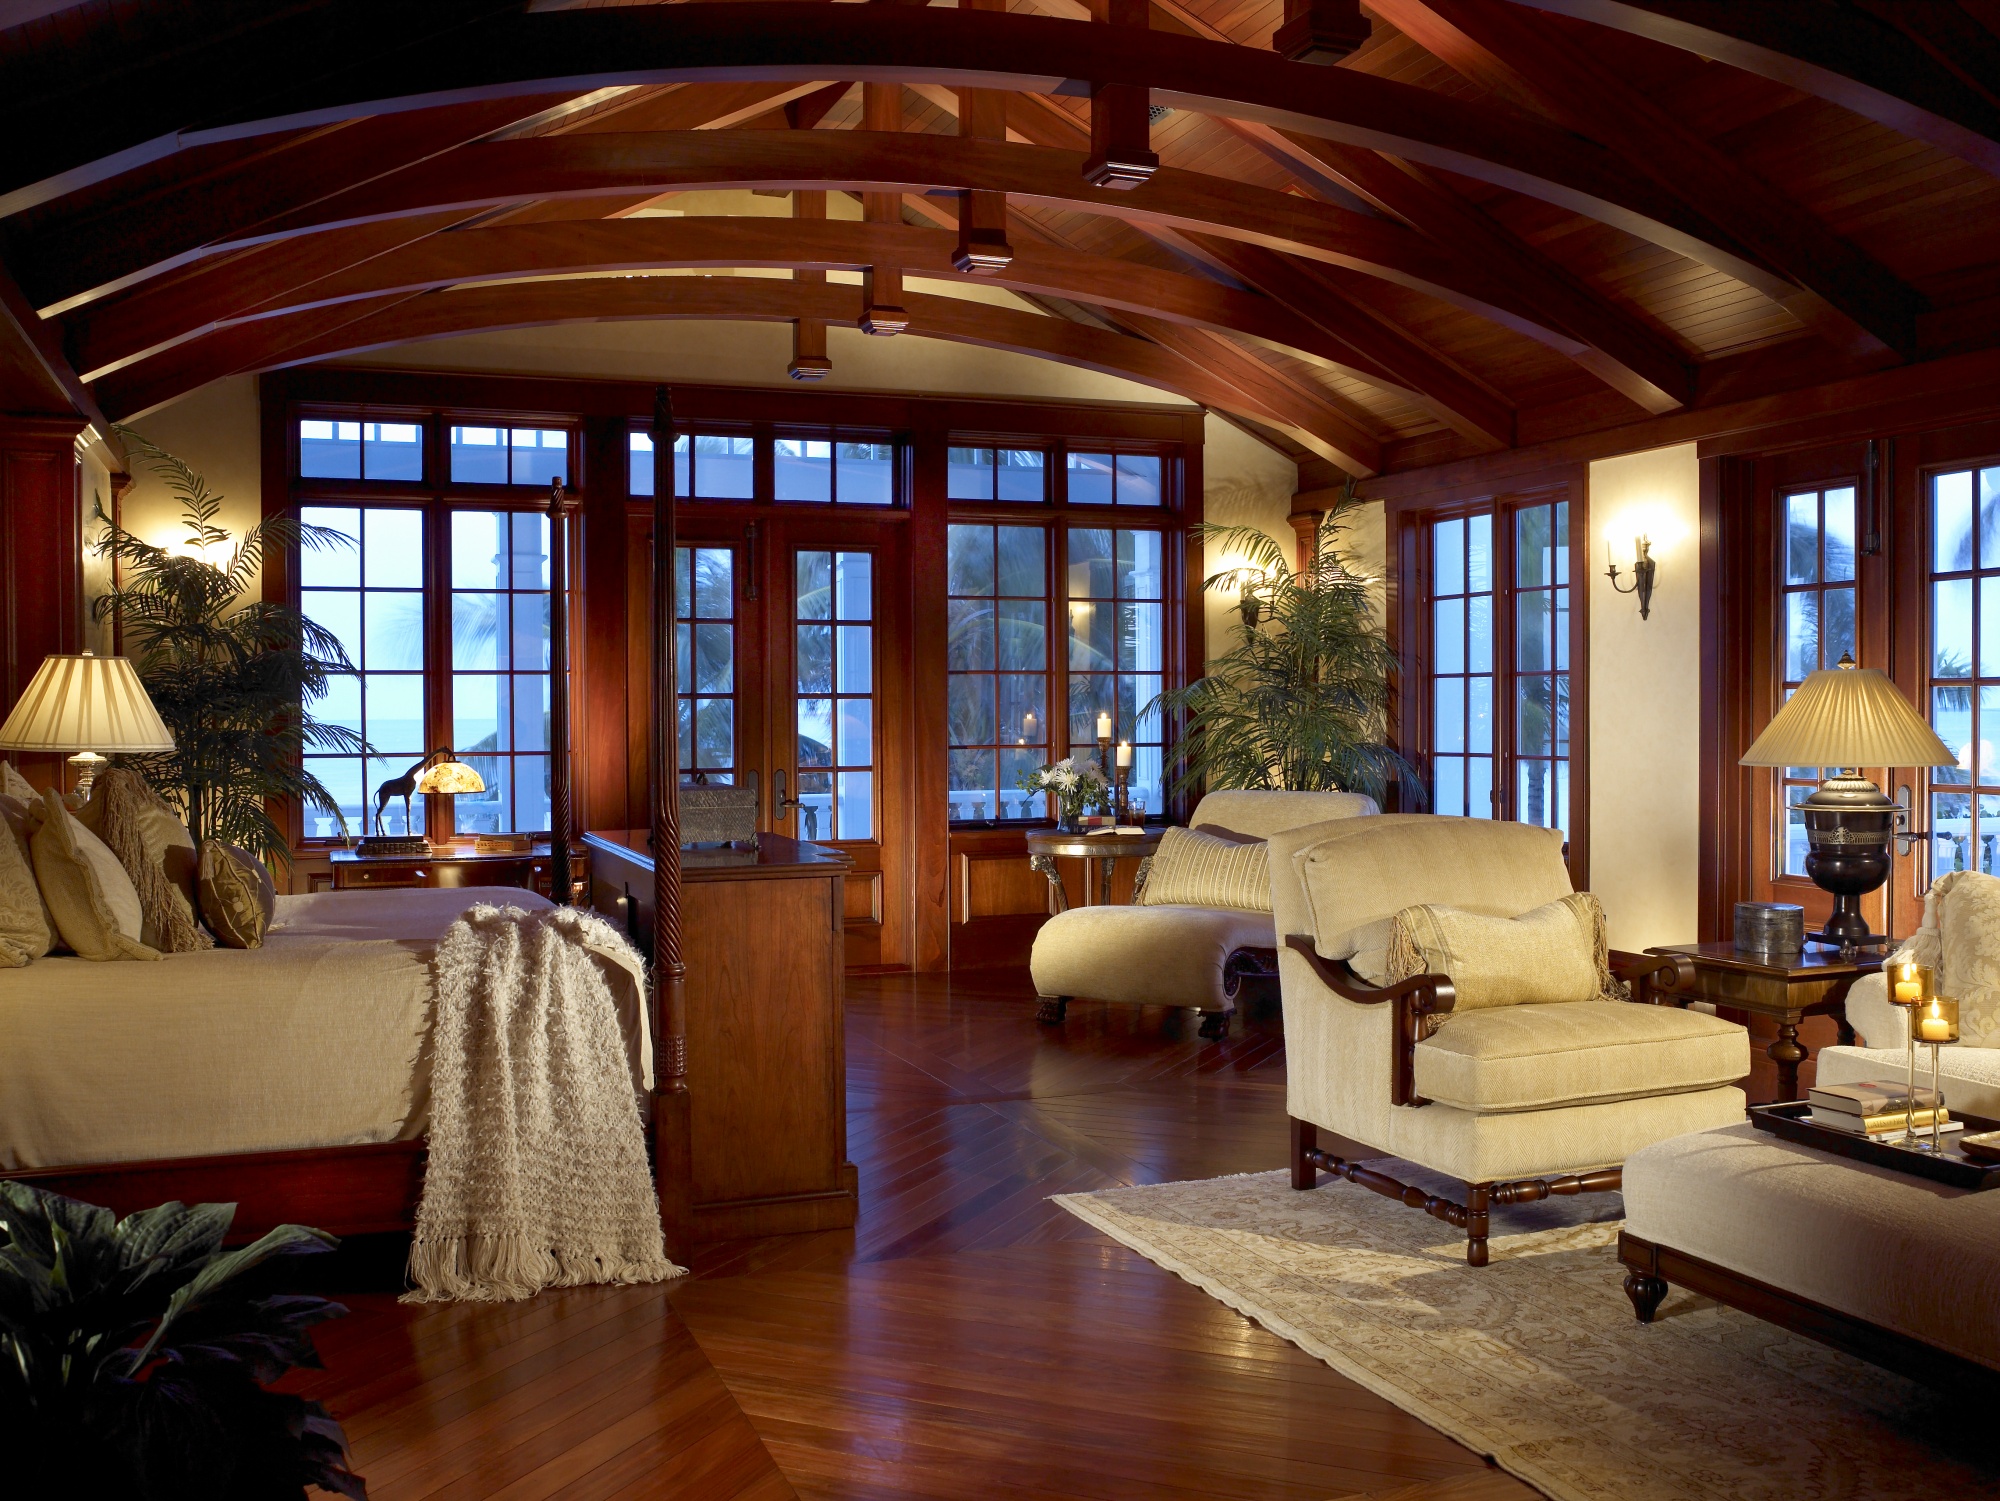 Exposed mahogany beams and venetian plaster walls are featured in the master bedroom.